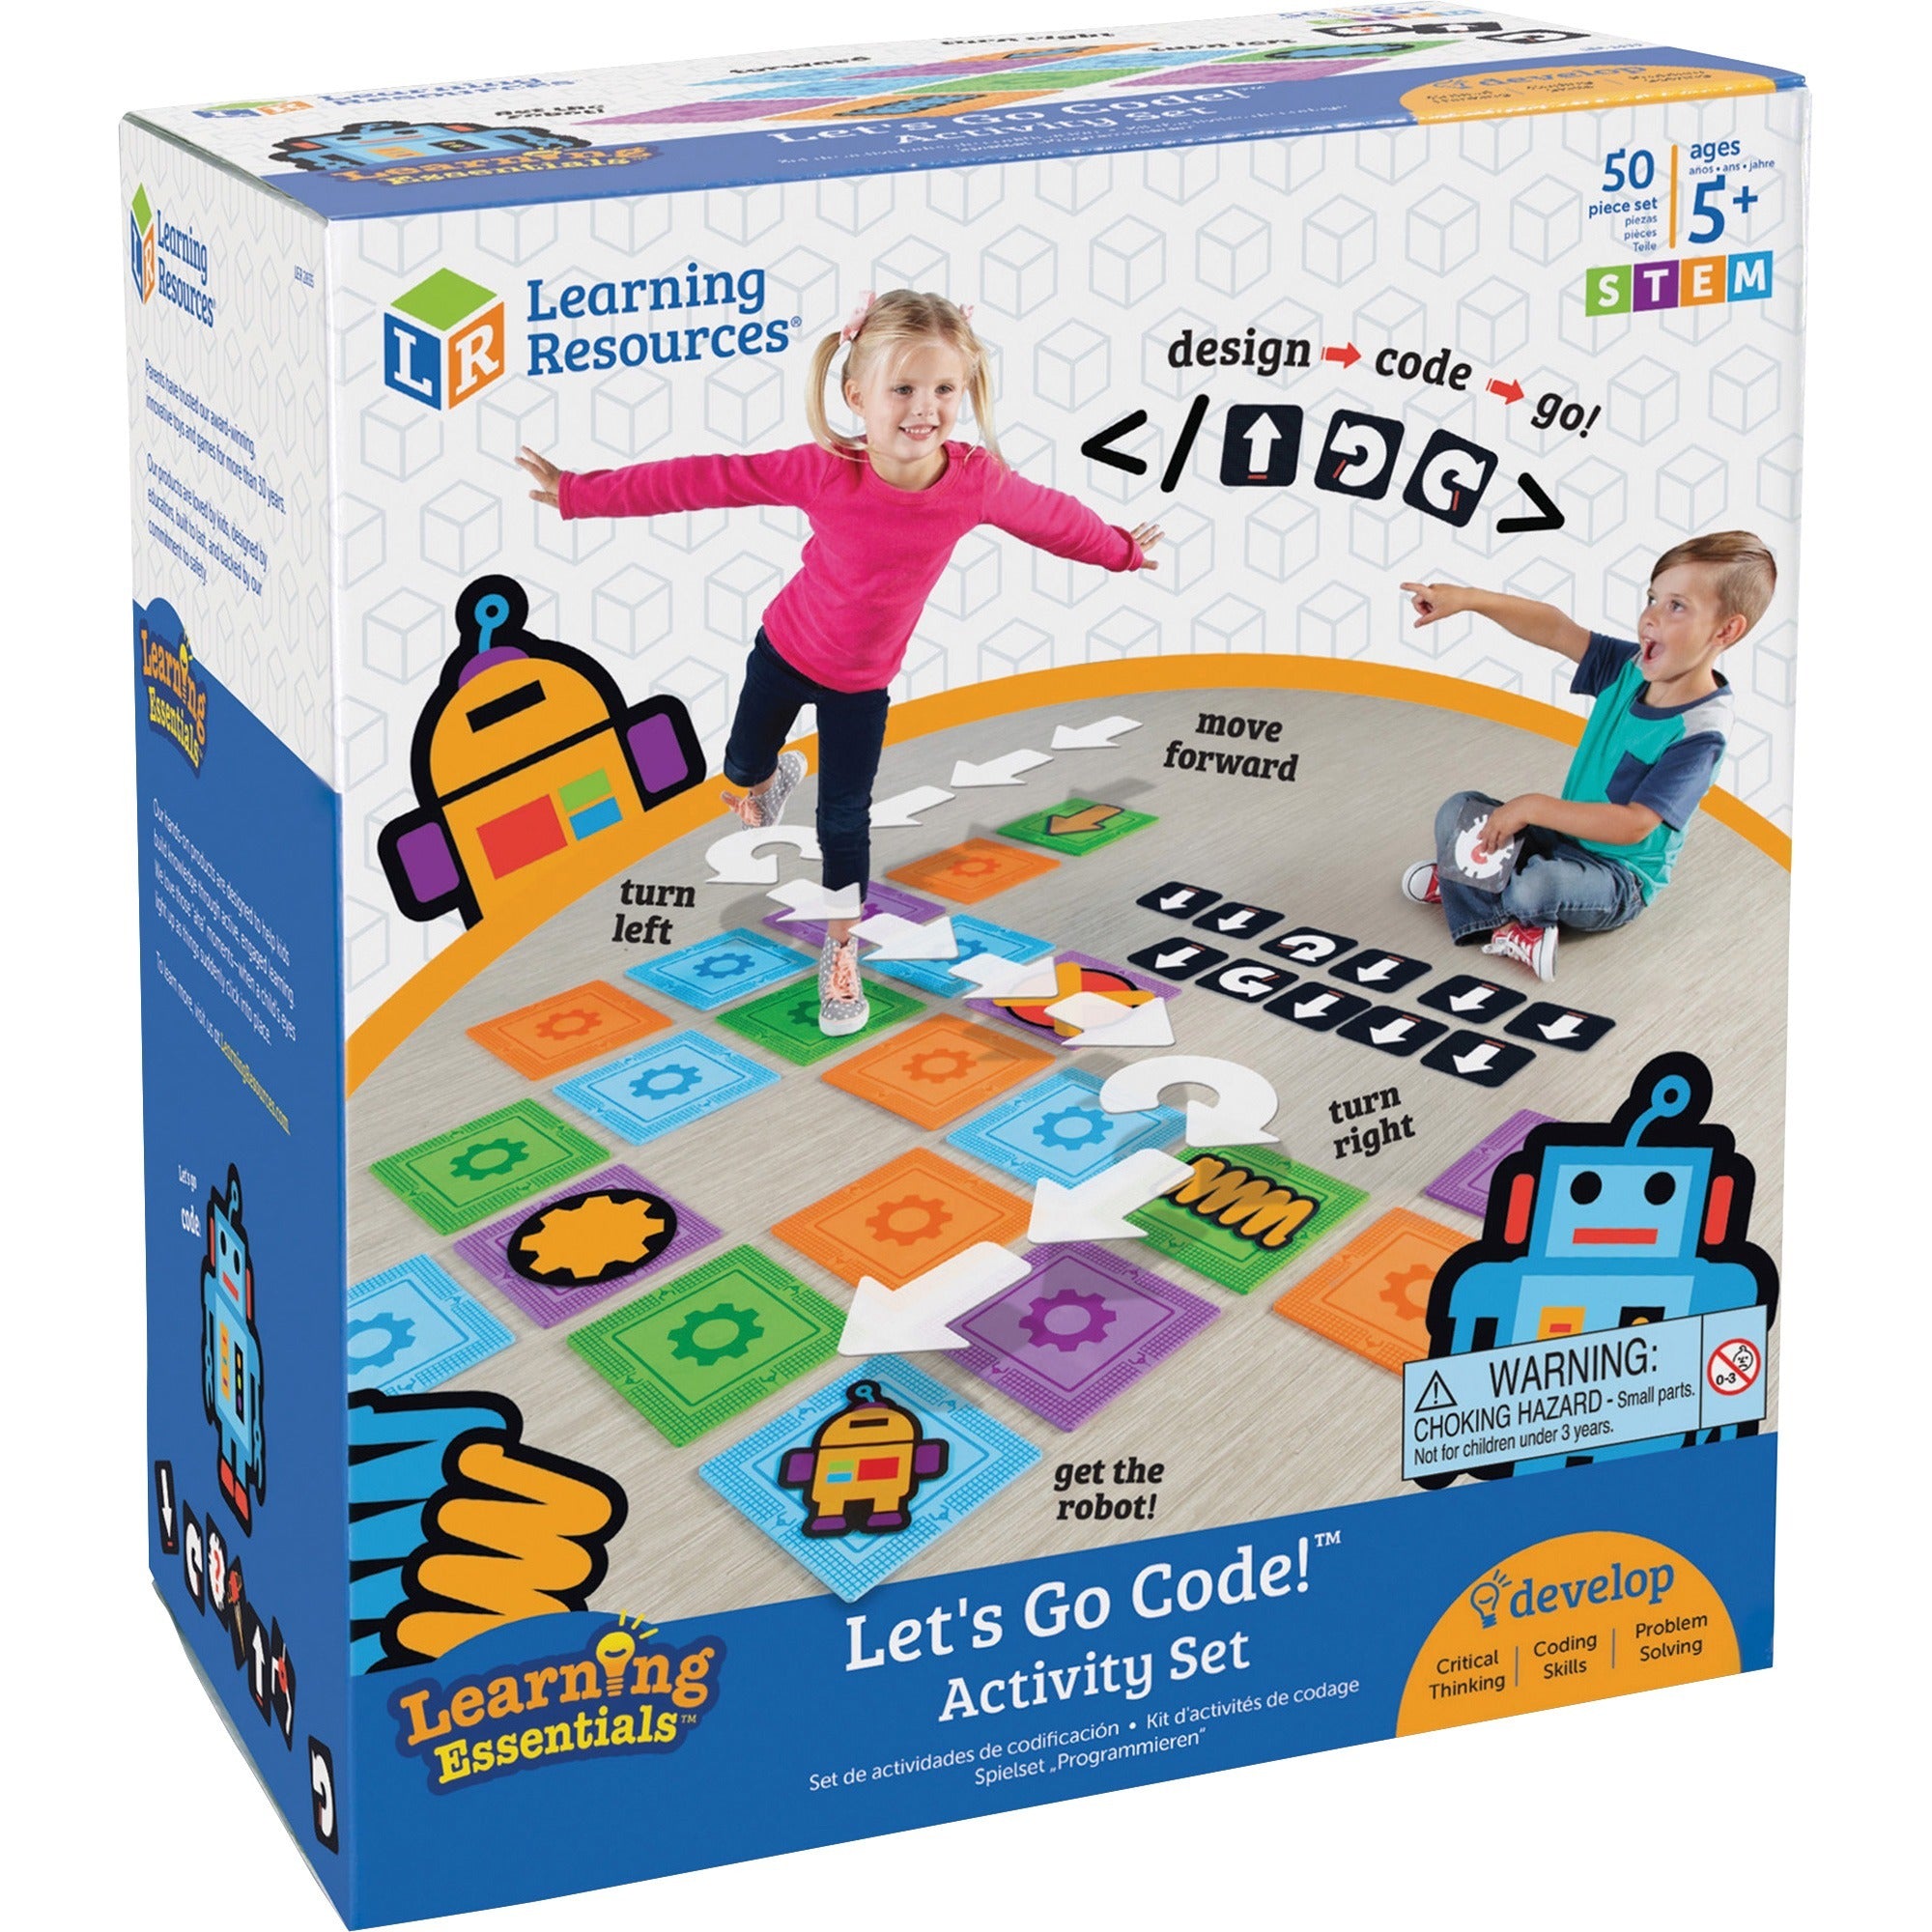 learning-resources-ages-5+-lets-go-code-activity-set-theme-subject-fun-skill-learning-gross-motor-visual-critical-thinking-sequential-thinking-problem-solving-direction-50-pieces-5+-1-set_lrnler2835 - 1